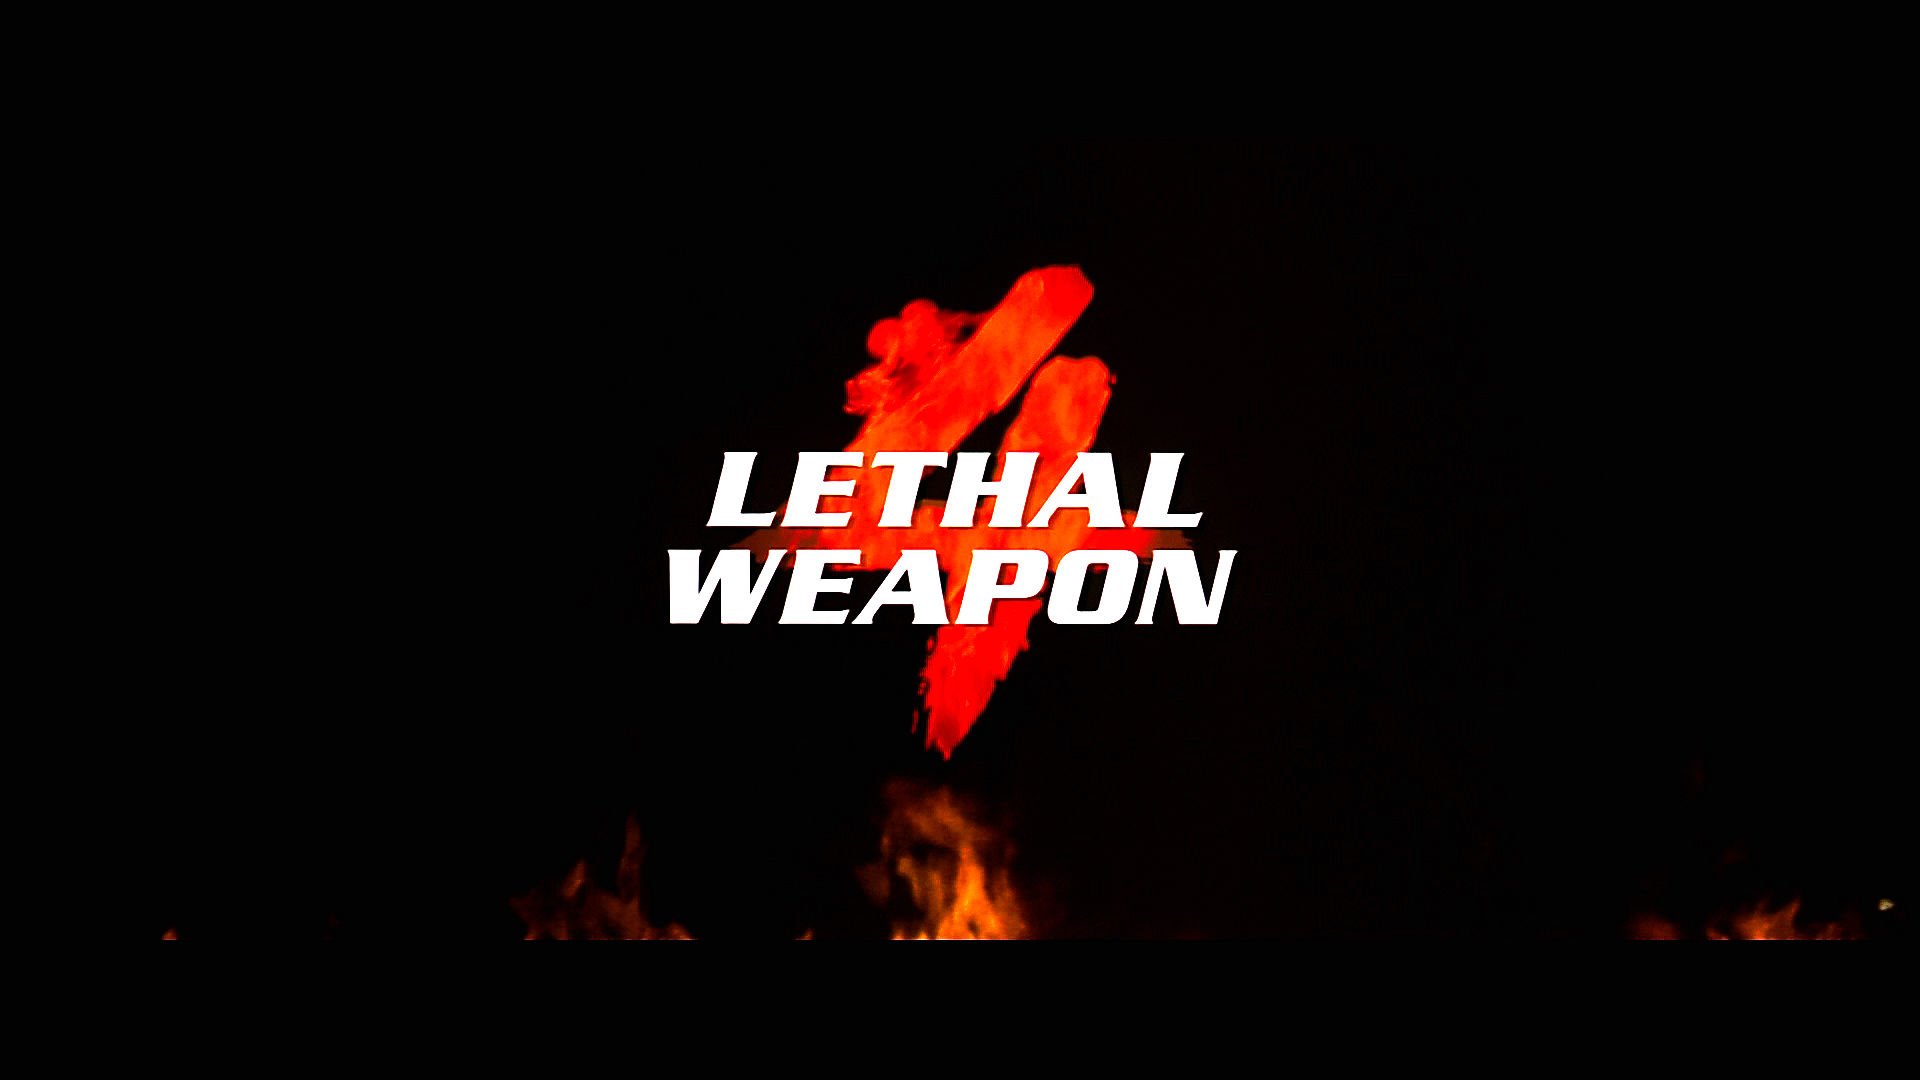 LETHAL WEAPON action thriller crime comedy wallpaper 1920x1080